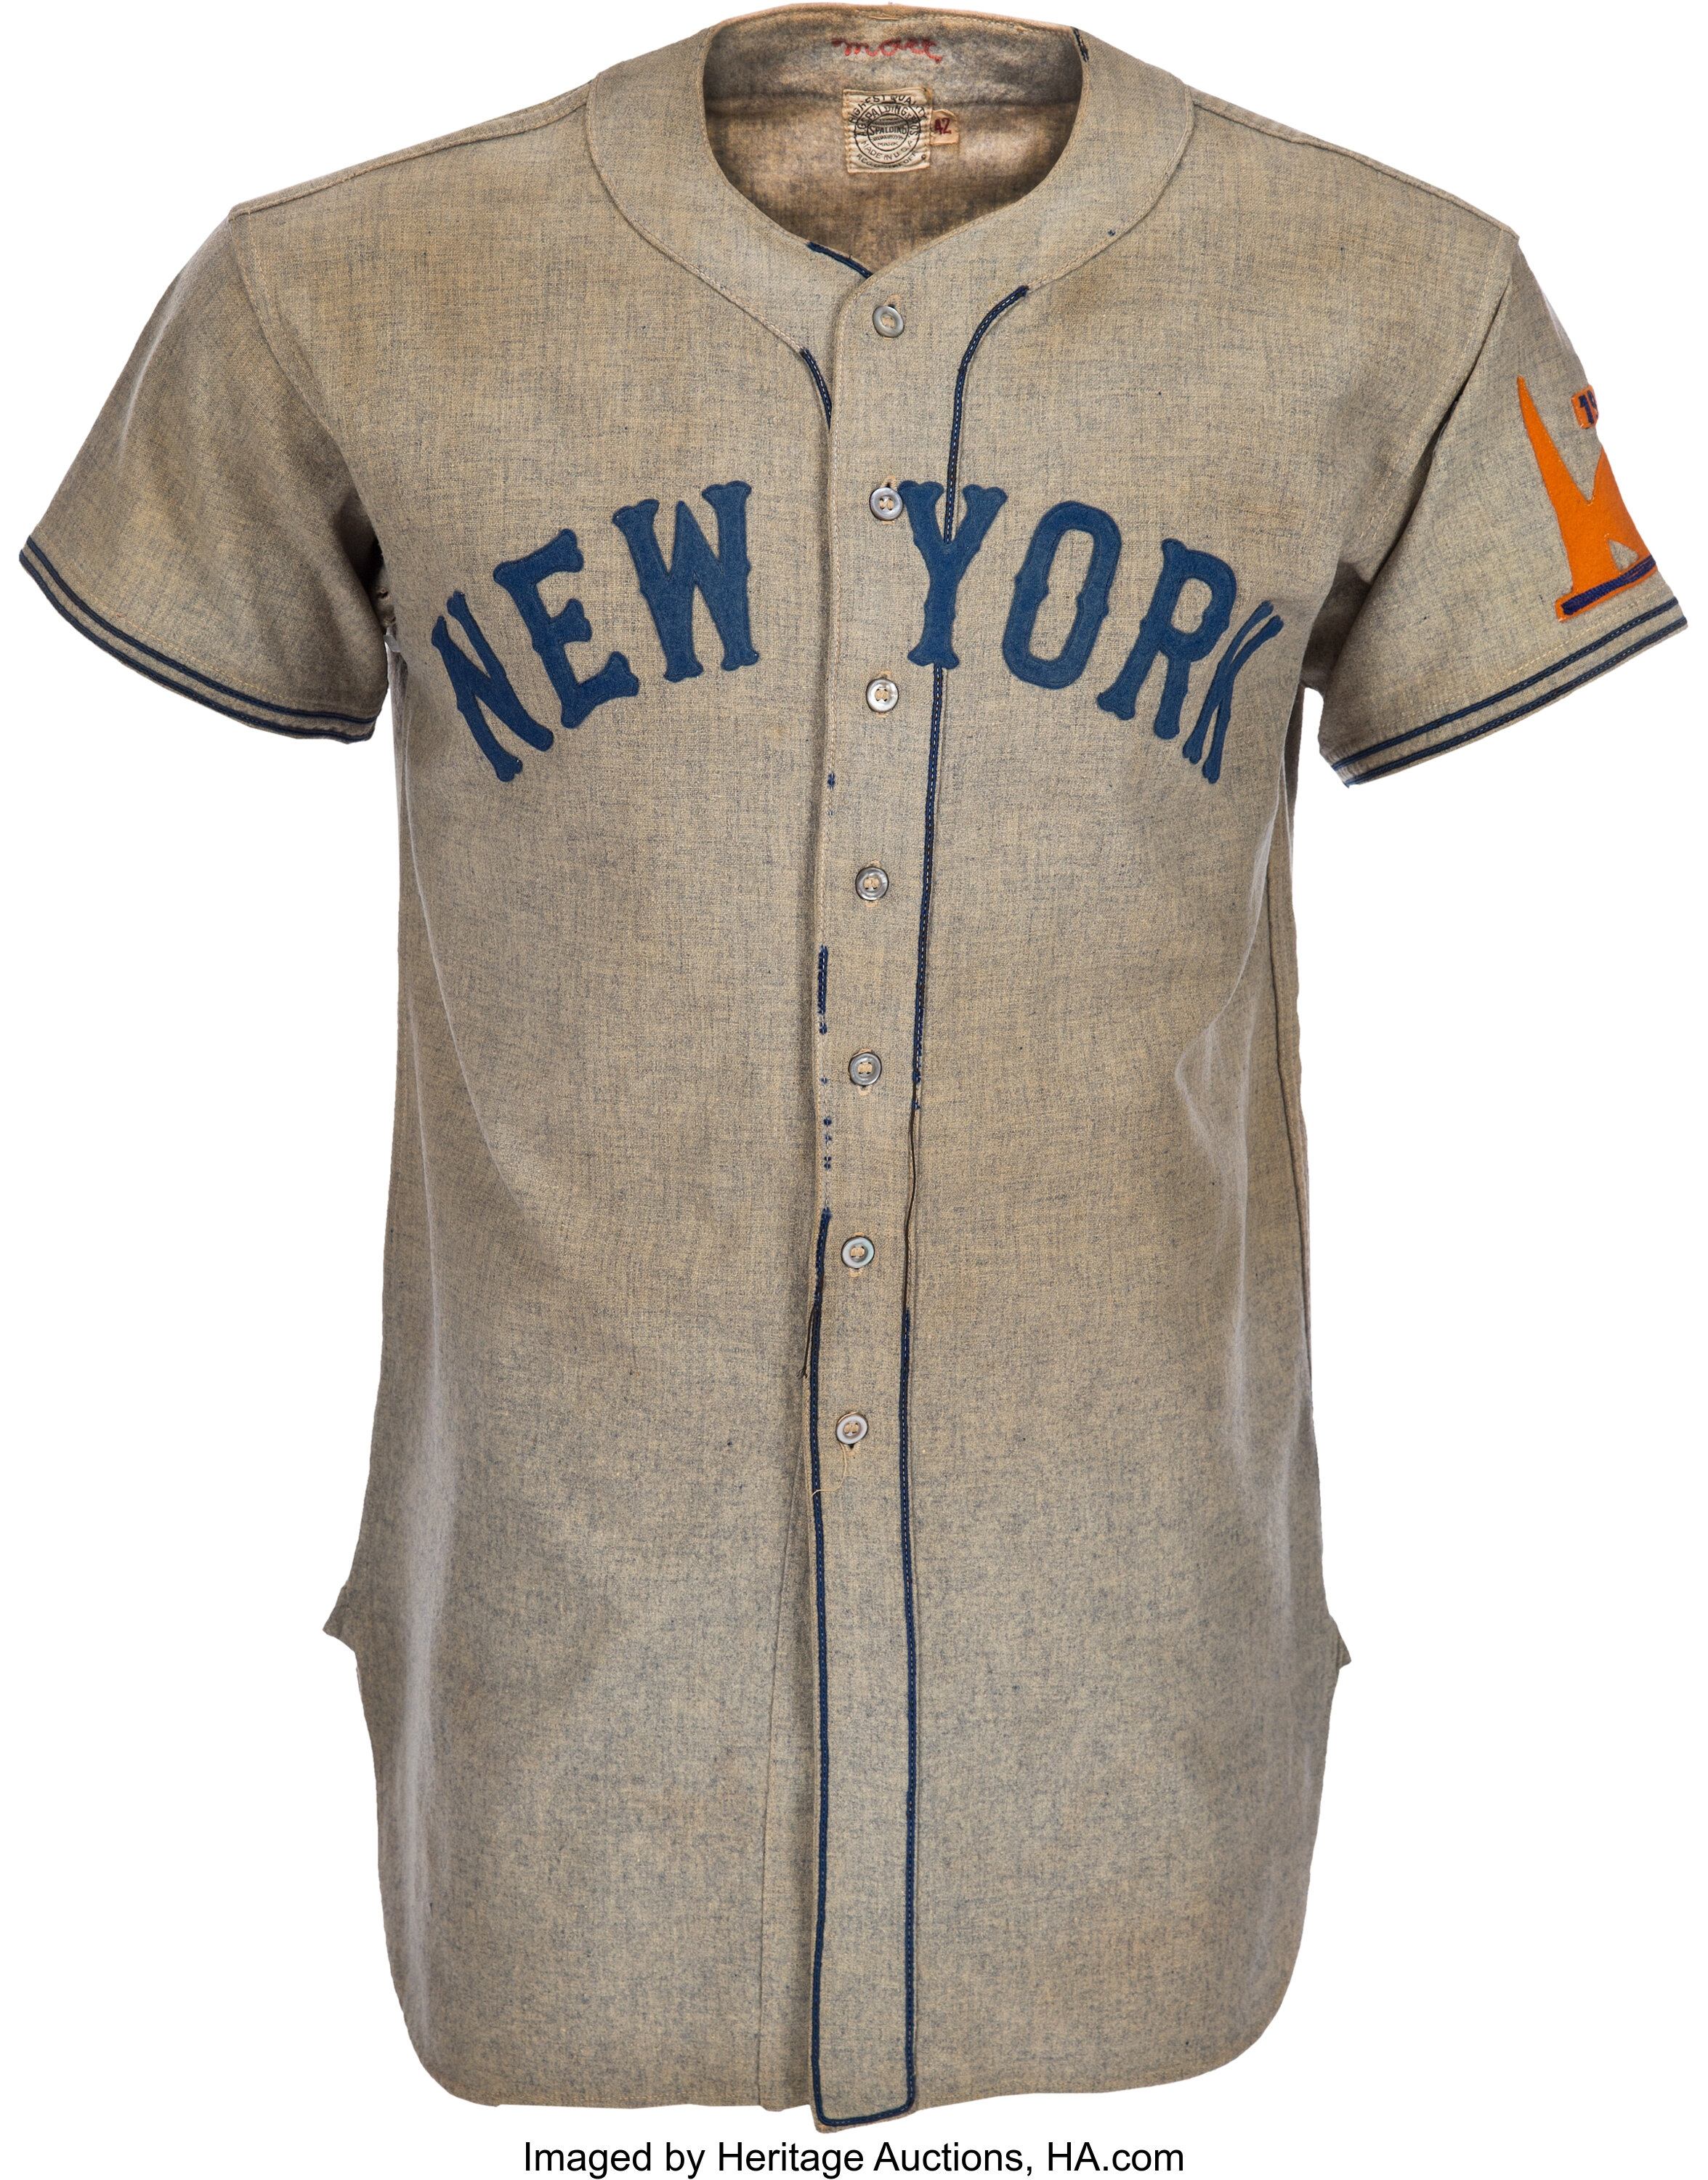 Sold at Auction: Carl Hubbell Signed, Vintage NY Giants Jersey